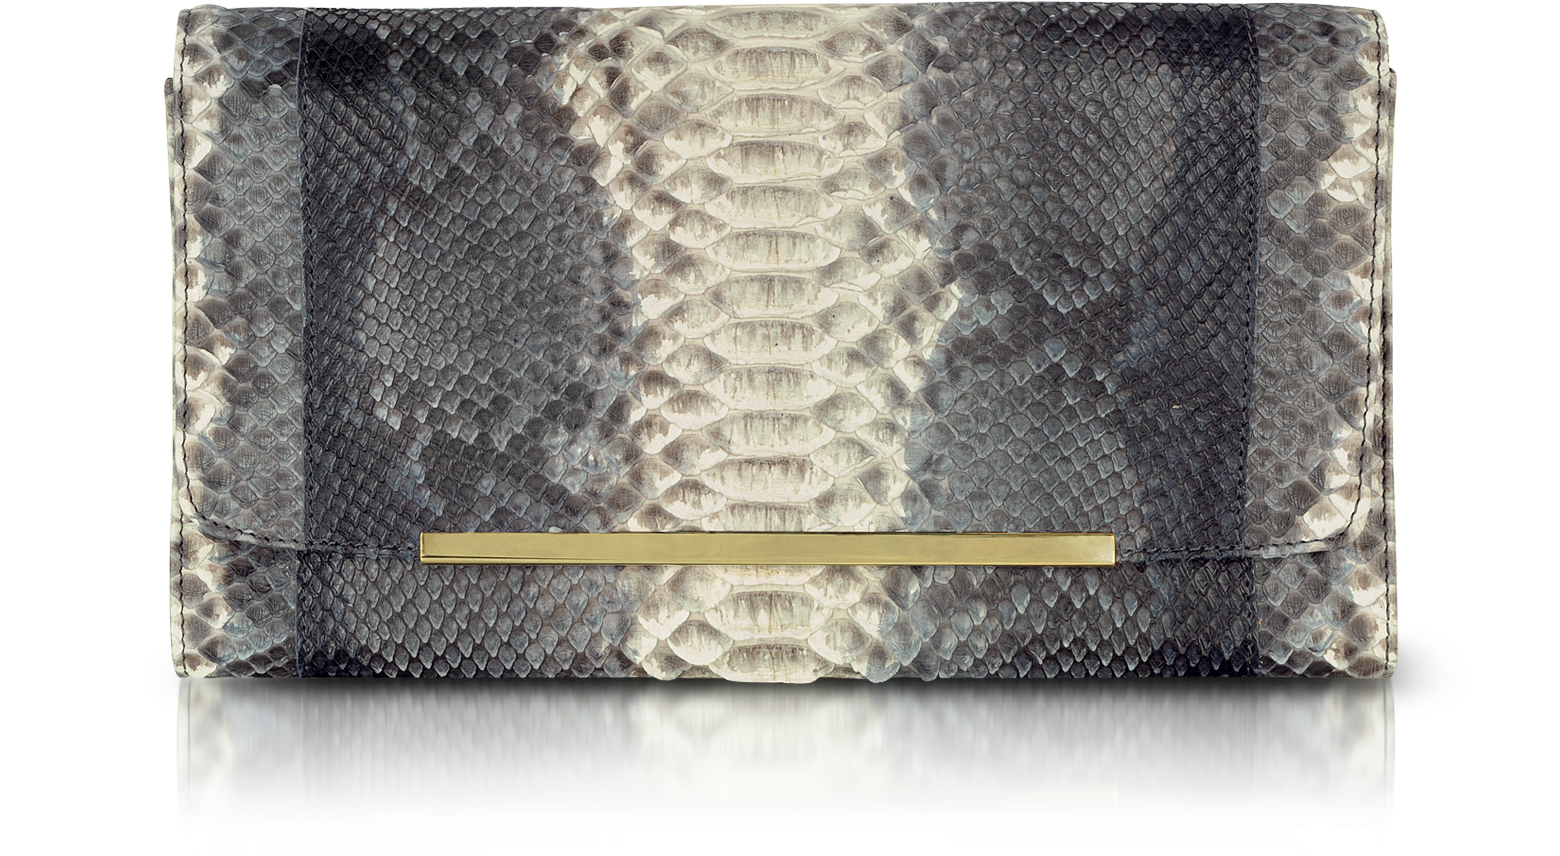 Ghibli Reversible Gray and Black Python Clutch at FORZIERI